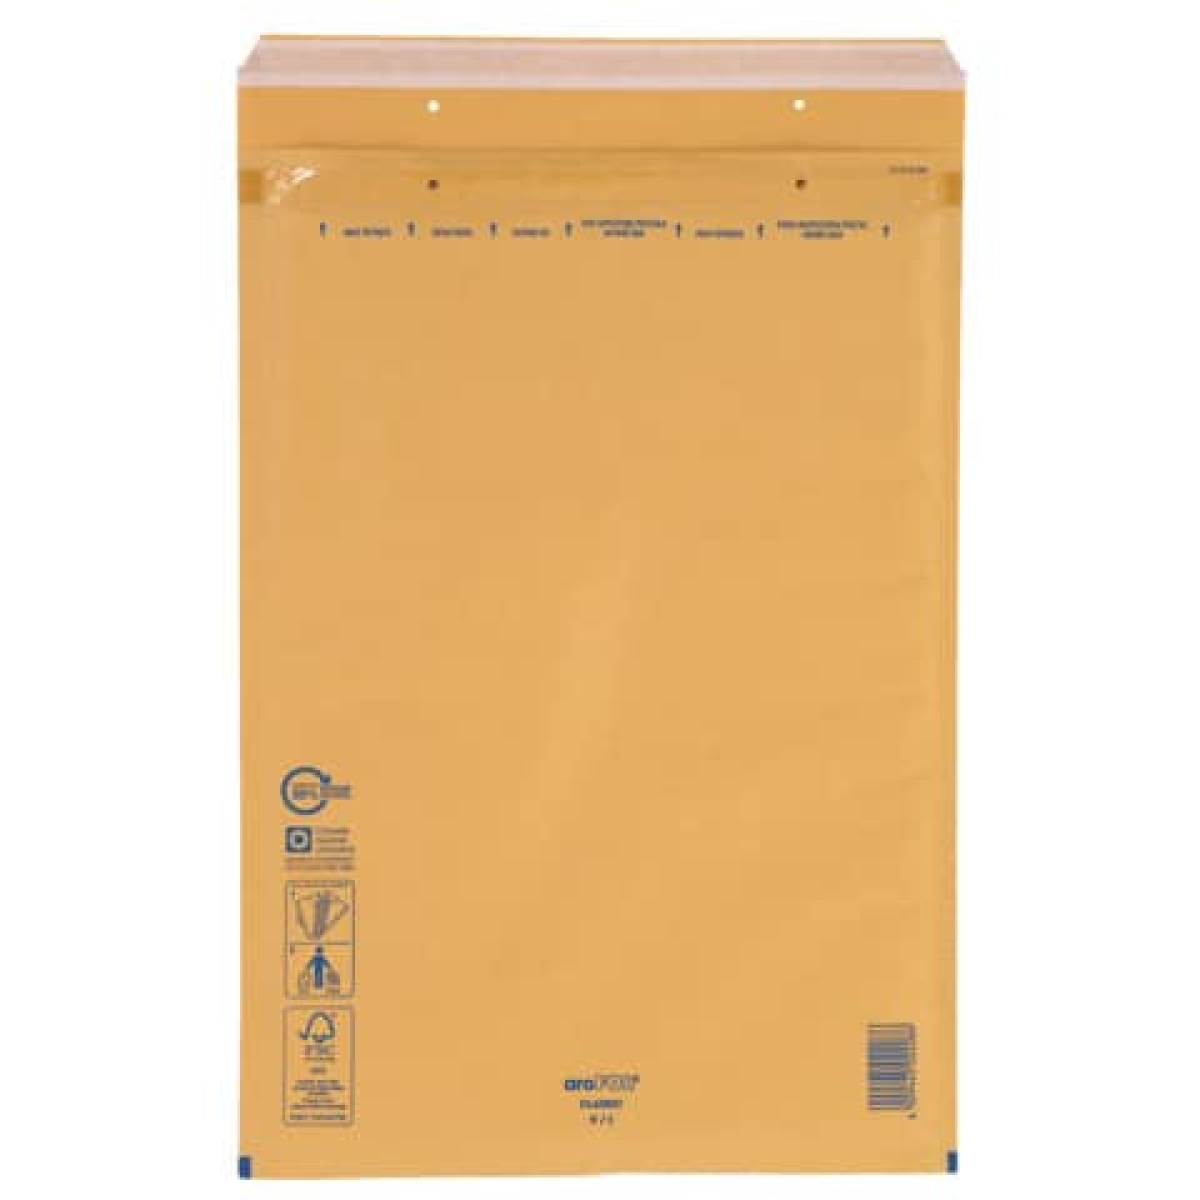 AROFOLAir-cushioned envelope Classic 9/I, 320x455 50mm, 10 pieces, brown 2FVAF000069-Price for 10 pcs.Article-No: 4009445072746